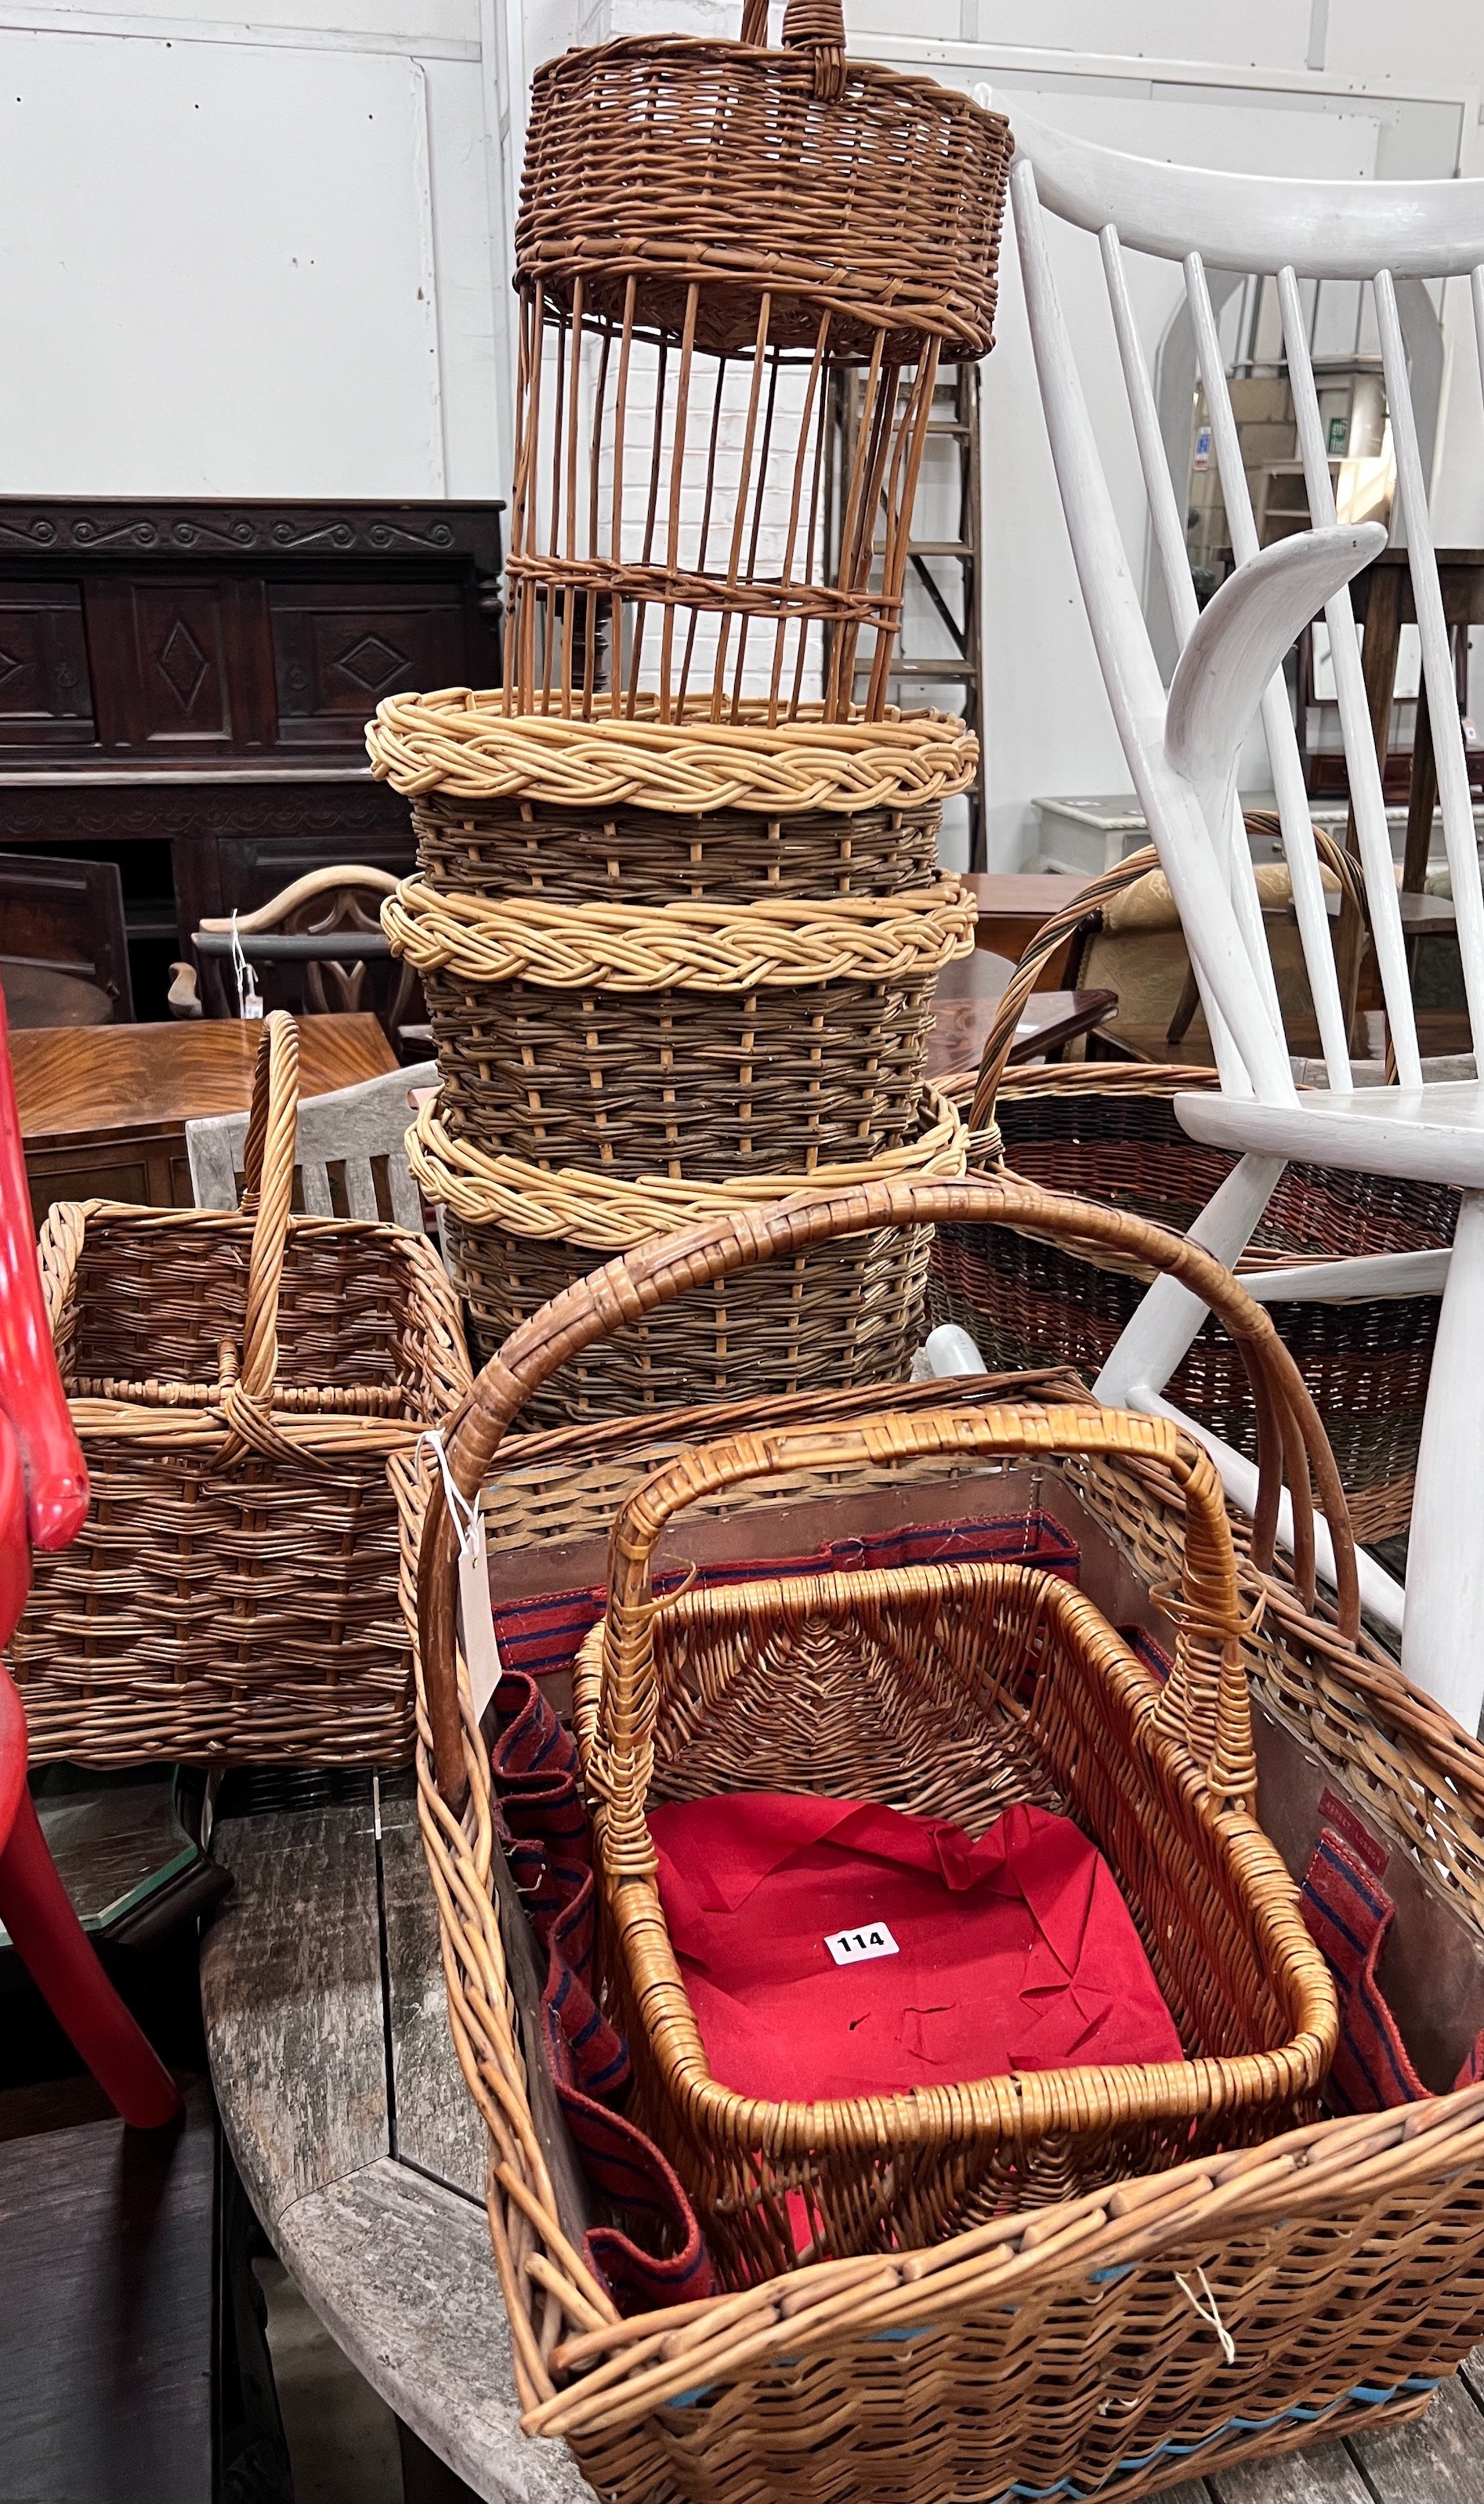 An Asprey horse grooming basket, three waste paper baskets, three picnic baskets and a picnic drinks basket (8) *Please note the sale commences at 9am.